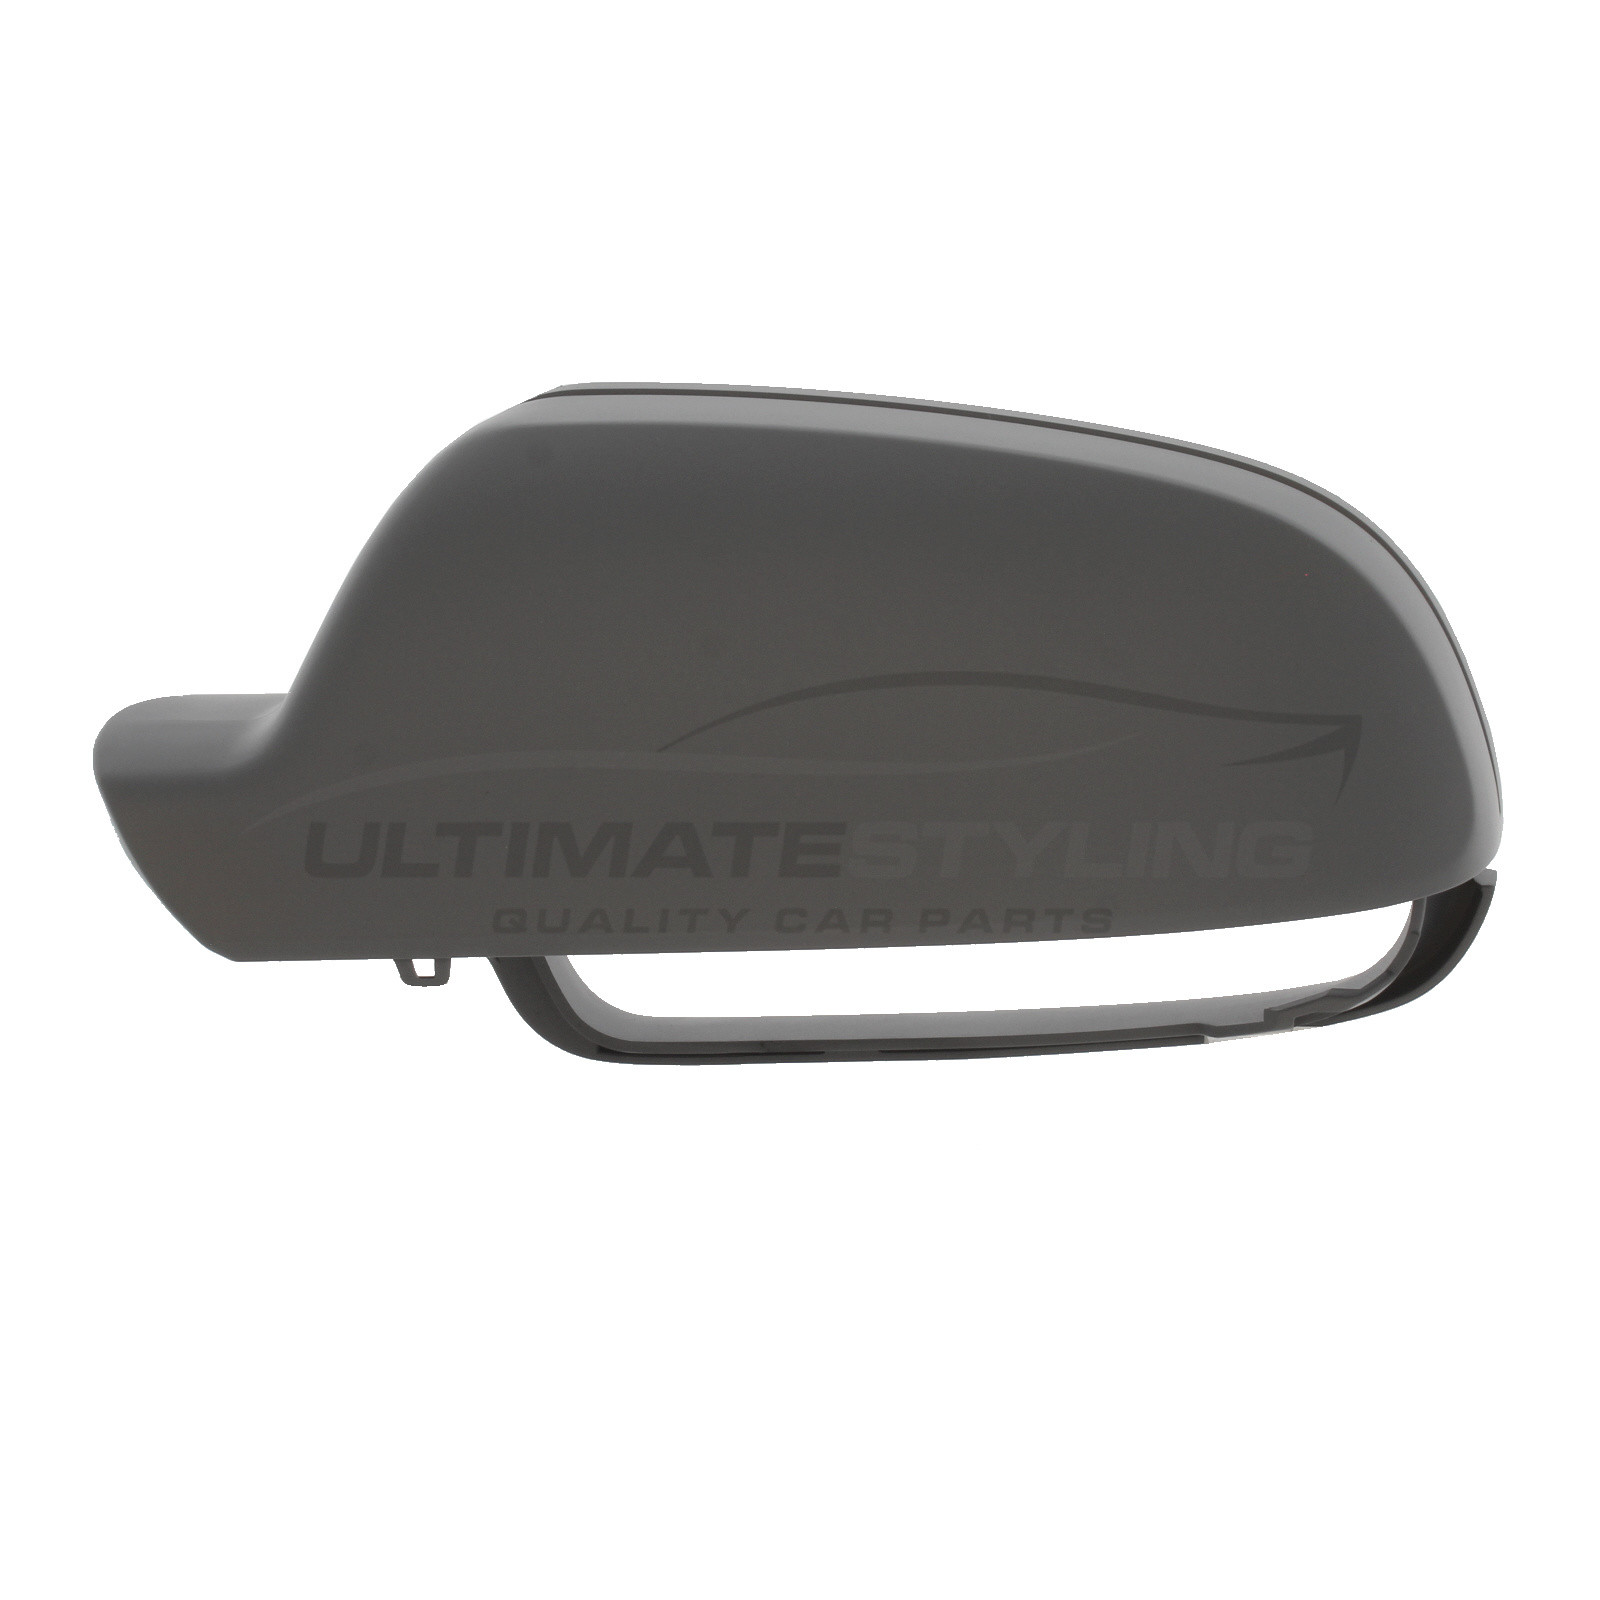 Audi A3 2003-2013, Audi A4 2008-2017, Audi A5 2007-2017, Audi A6 2008-2012 Wing Mirror Cover Cap Casing Primed Passenger Side (LH) Excludes Apertures for Mirror Indicator and Side Assist Lamp